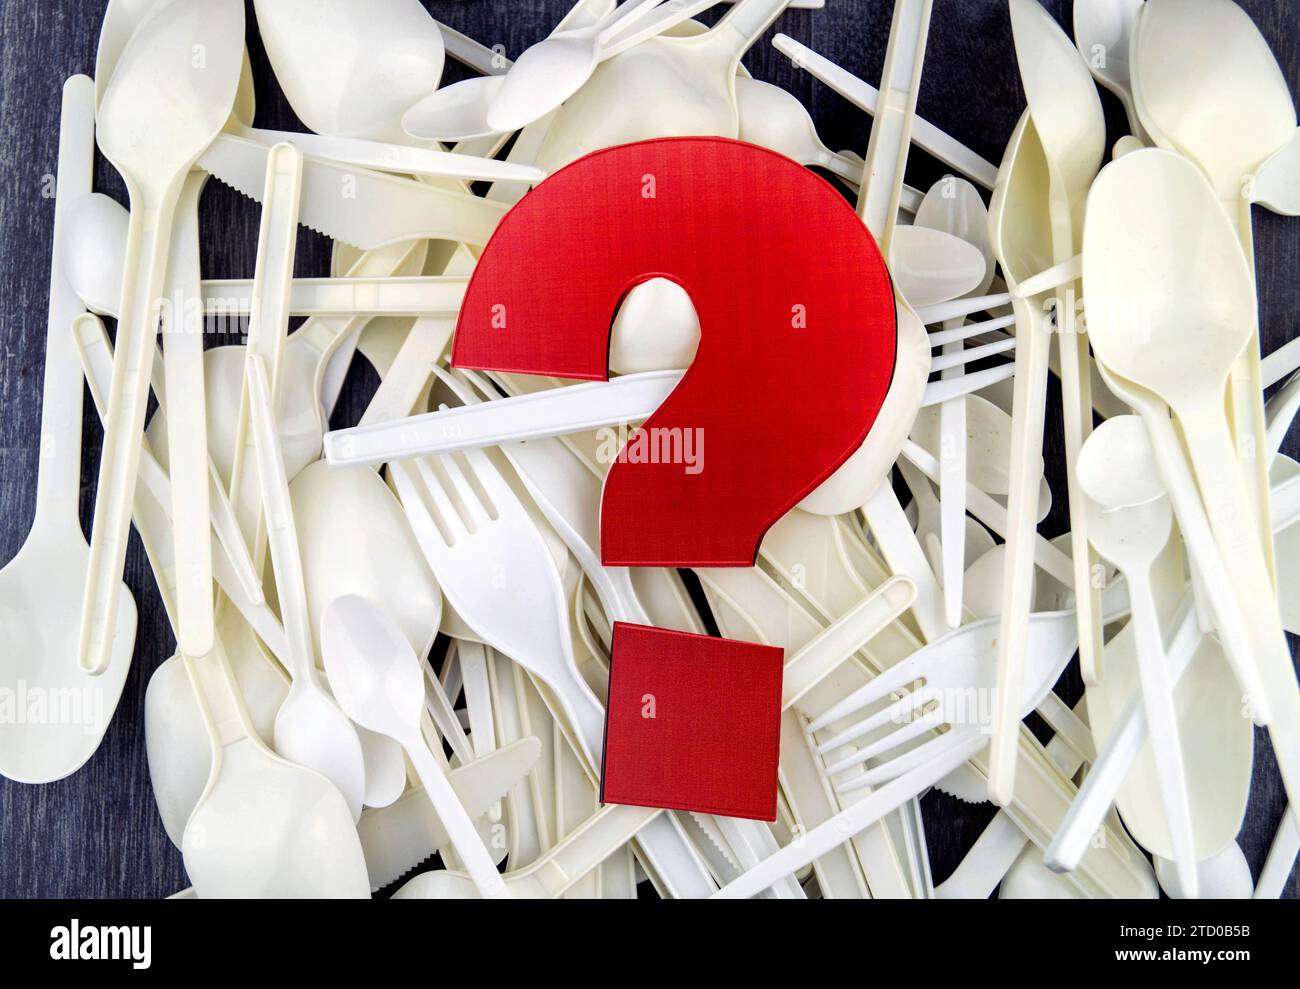 Plastic cutlery with a red question mark Stock Photo